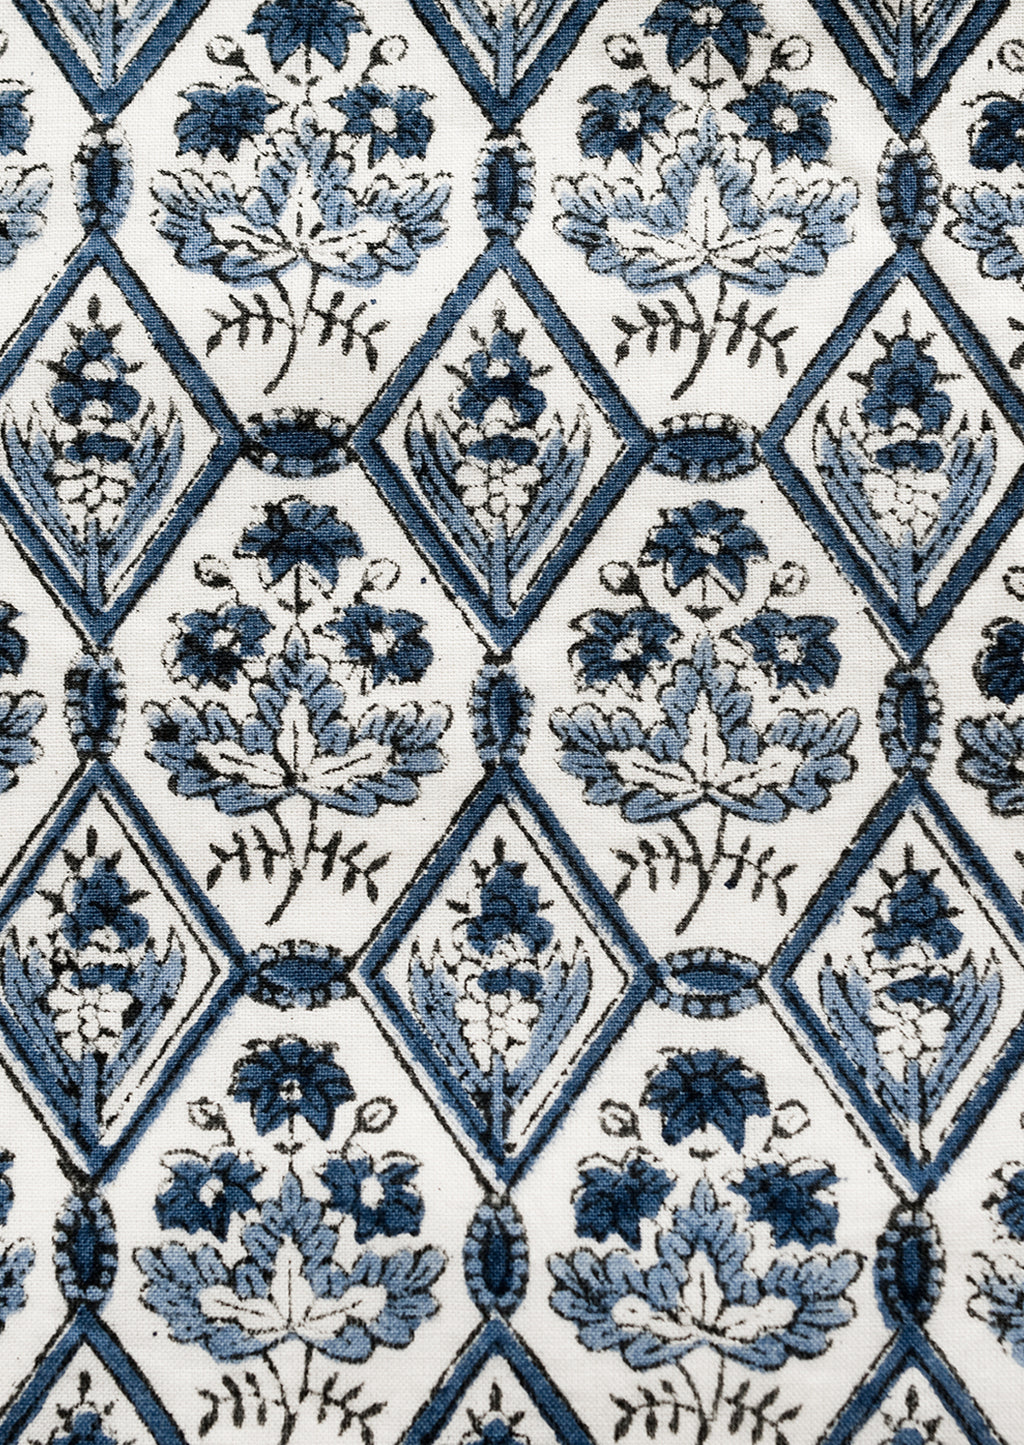 2: A block printed pillow in blue and white tile print.